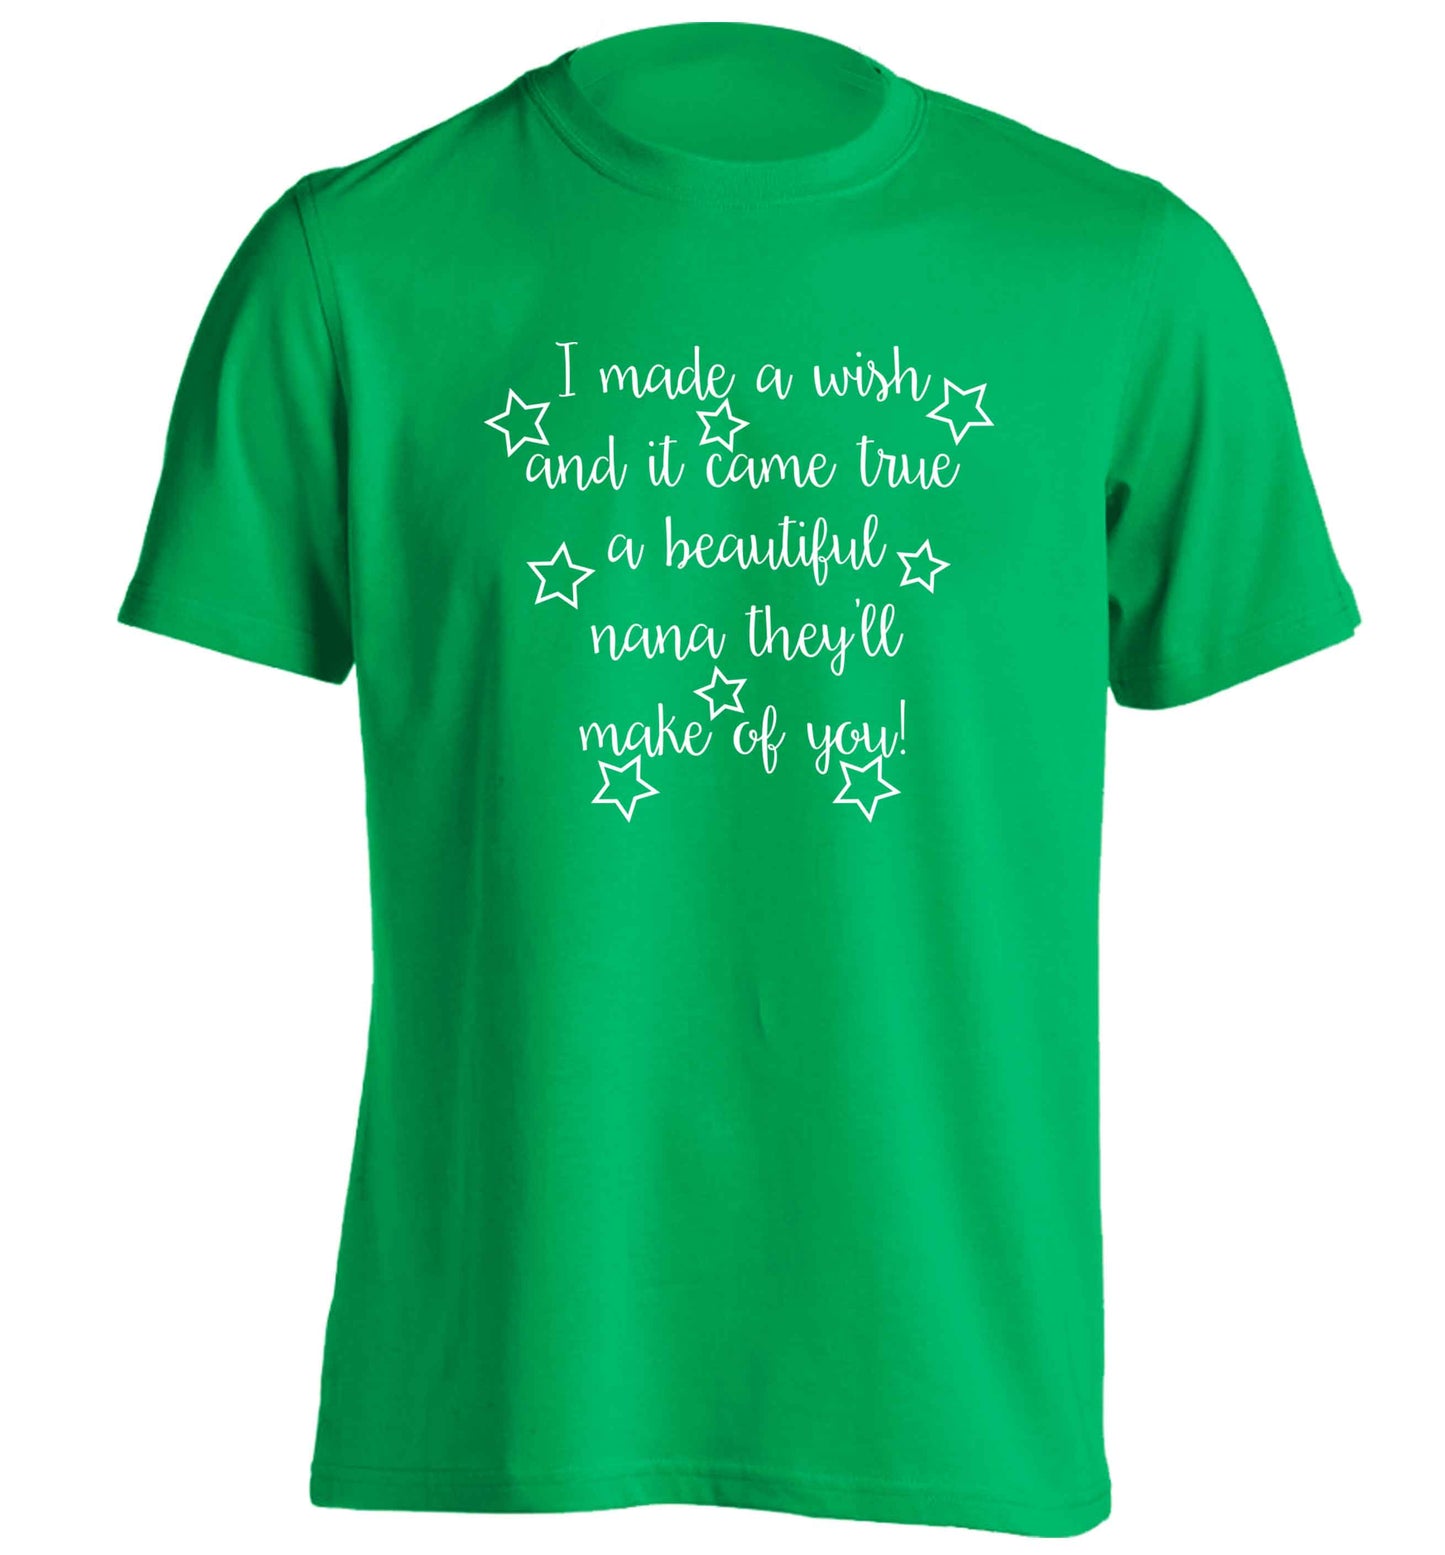 I made a wish and it came true a beautiful nana they'll make of you! adults unisex green Tshirt 2XL